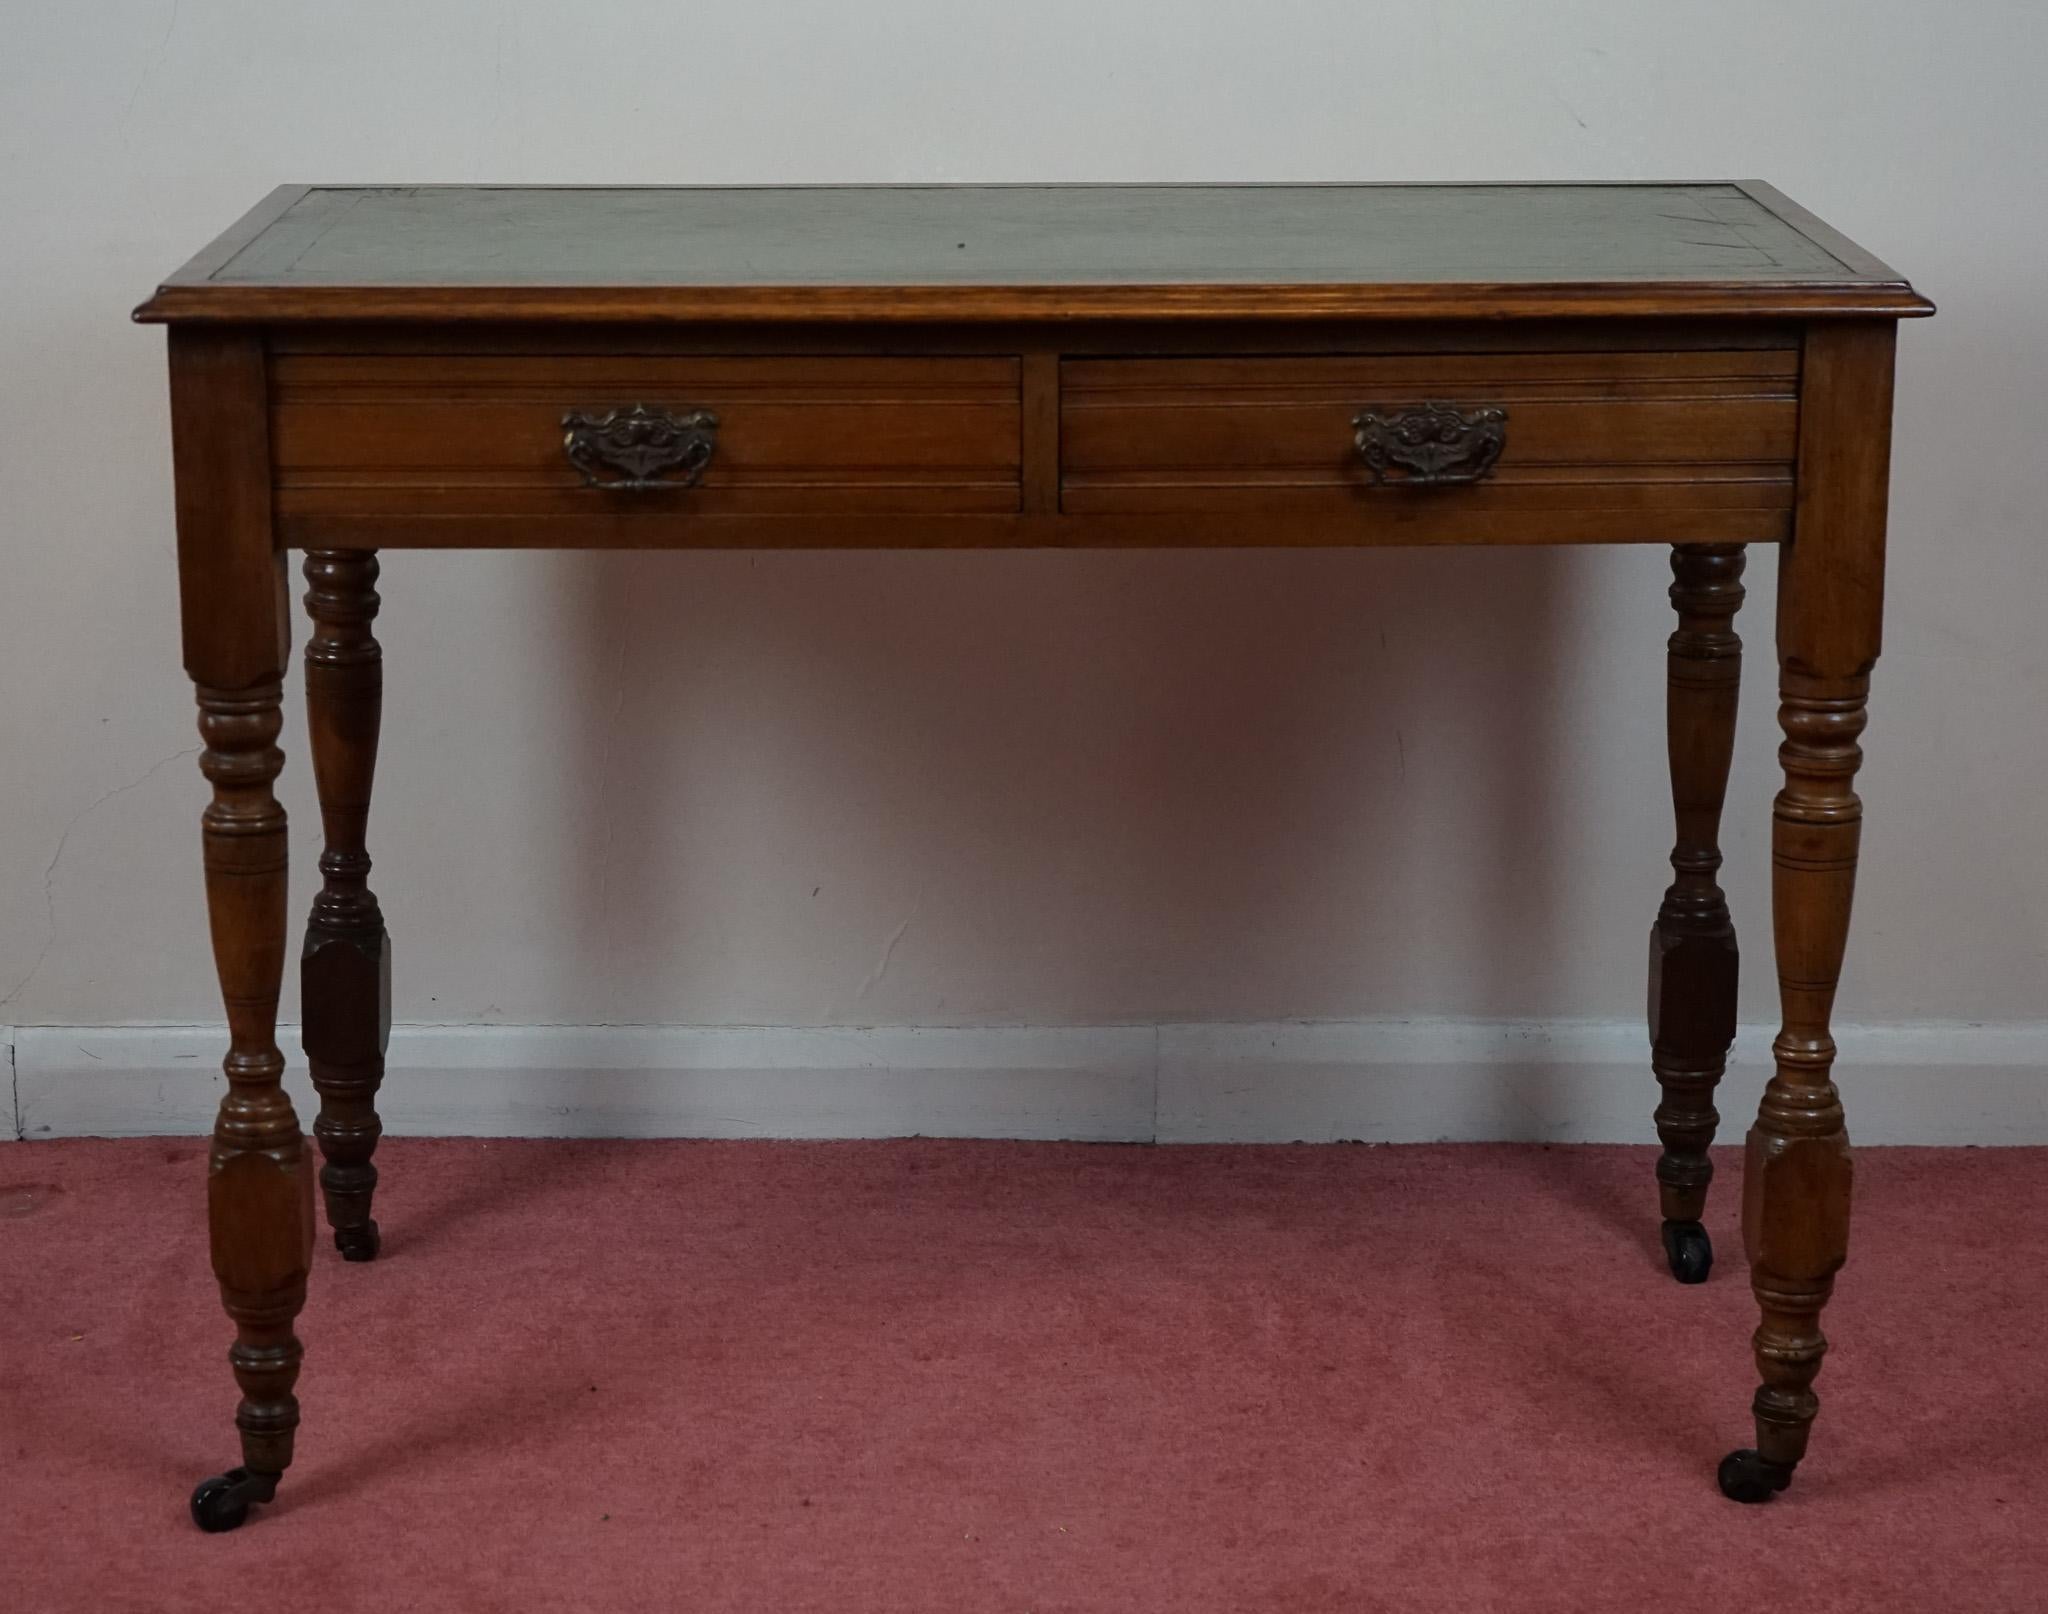 For sale a beautiful Edwardian mahogany writing table with inset tooled green leather writing surface fitted 2 drawers raised on turned supports ending in casters . Perfect condition !

Dimension H 80 CM X W 104 CM X D 50 CM 
Don't hesitate to